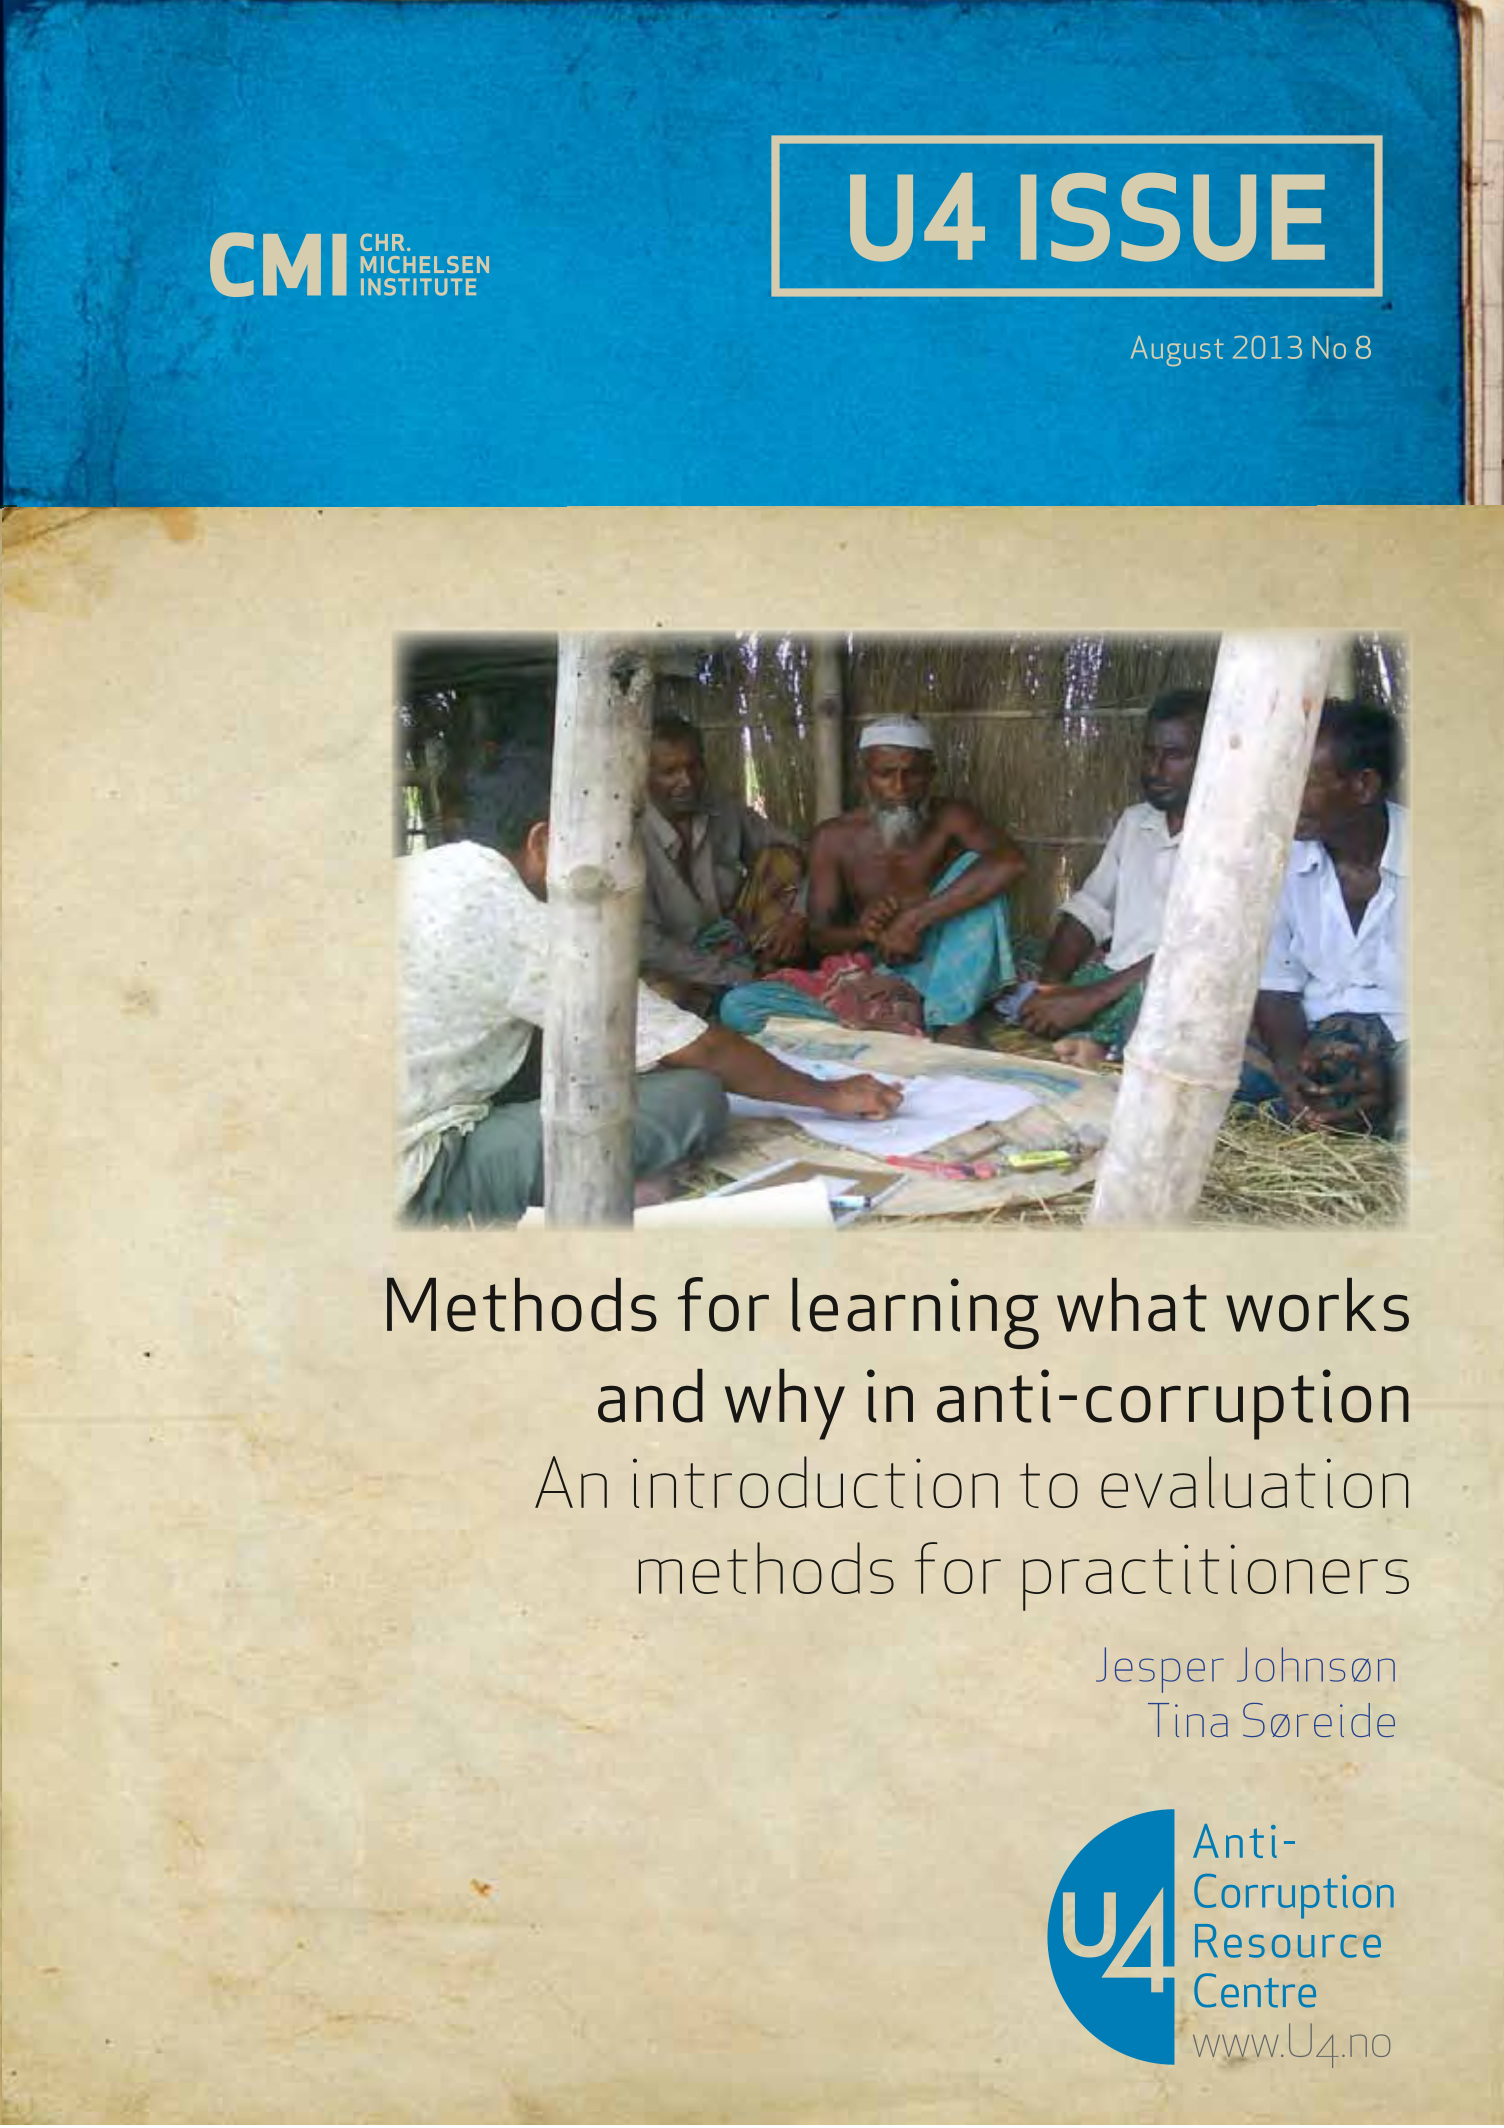 Methods for learning what works and why in anti-corruption: An introduction to evaluation methods for practitioners